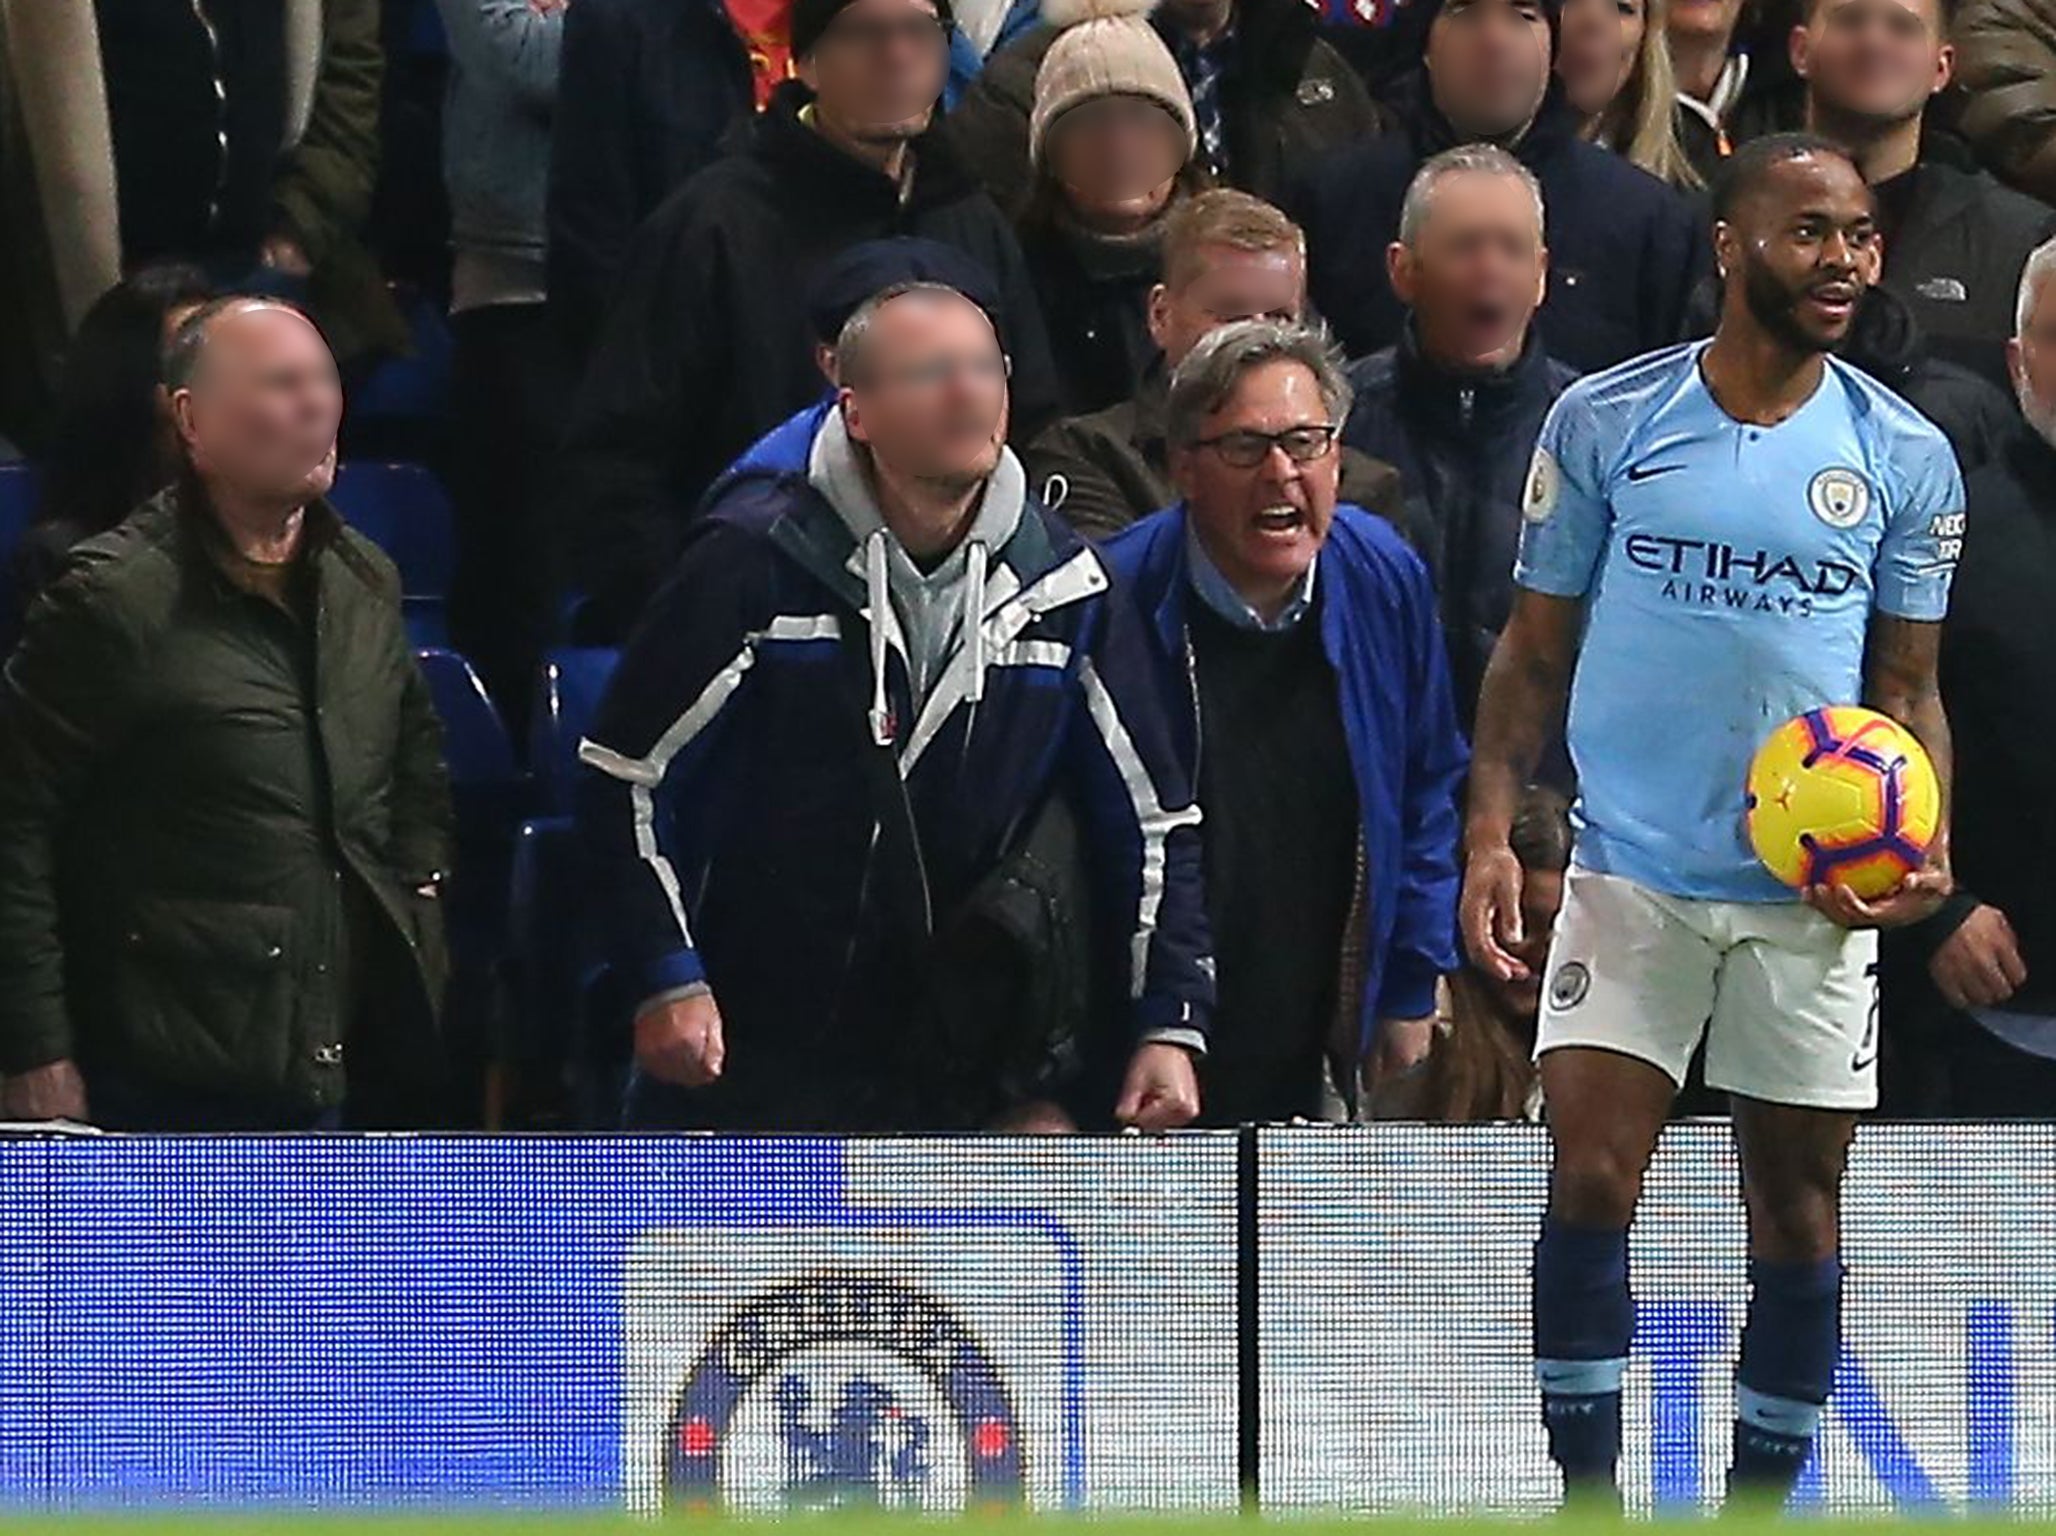 Raheem Sterling claims he was abused by supports